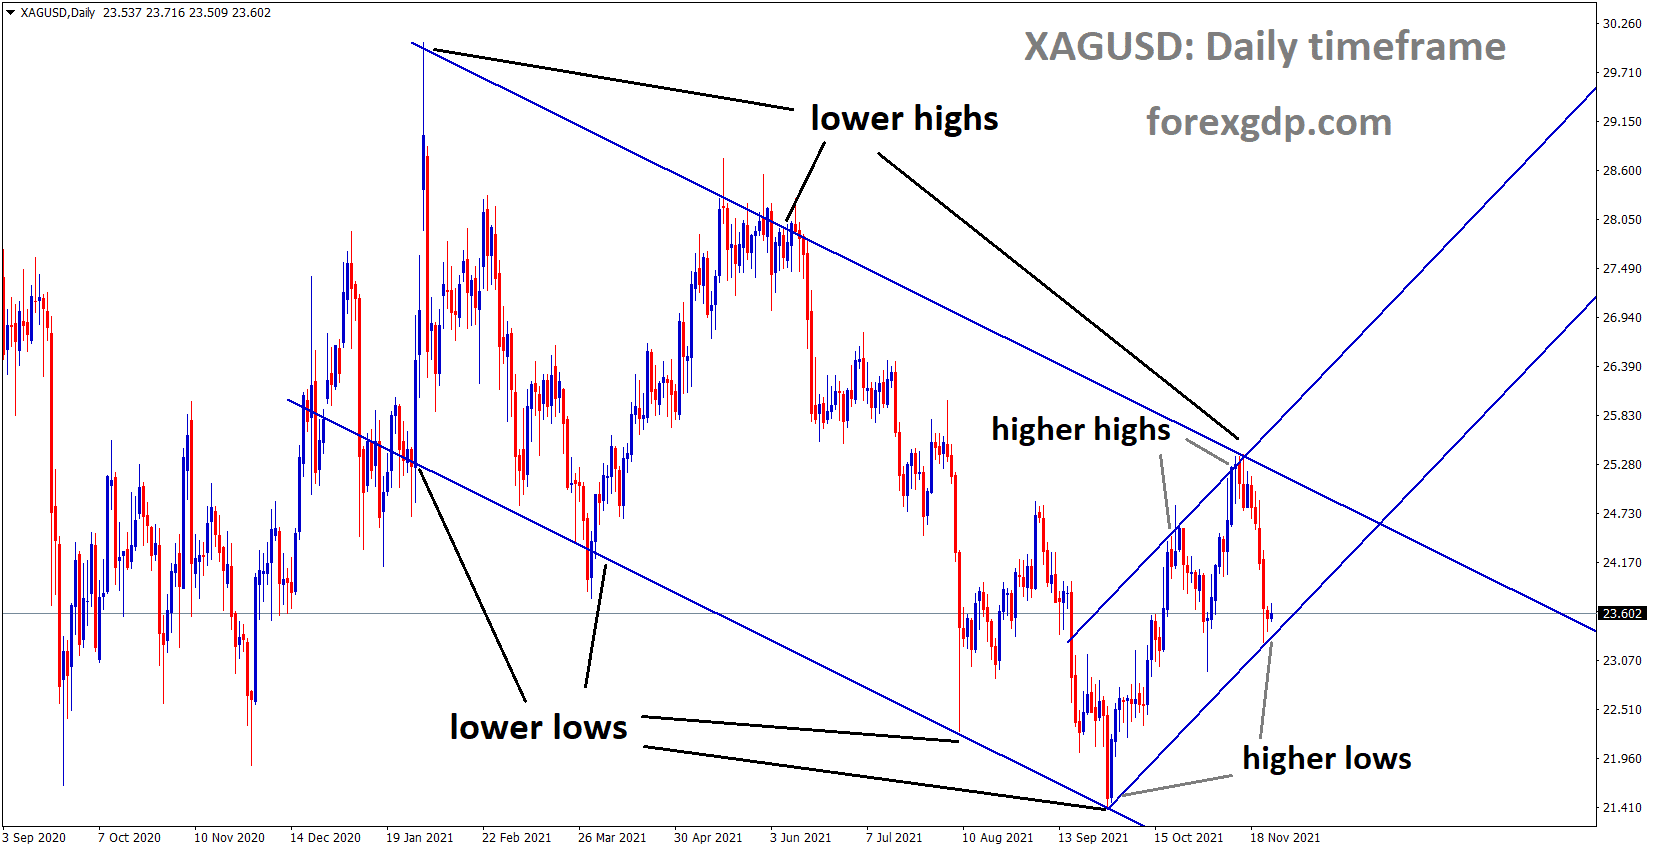 XAGUSD Silver price is moving in an Ascending channel and the market reached the higher low area of the channel